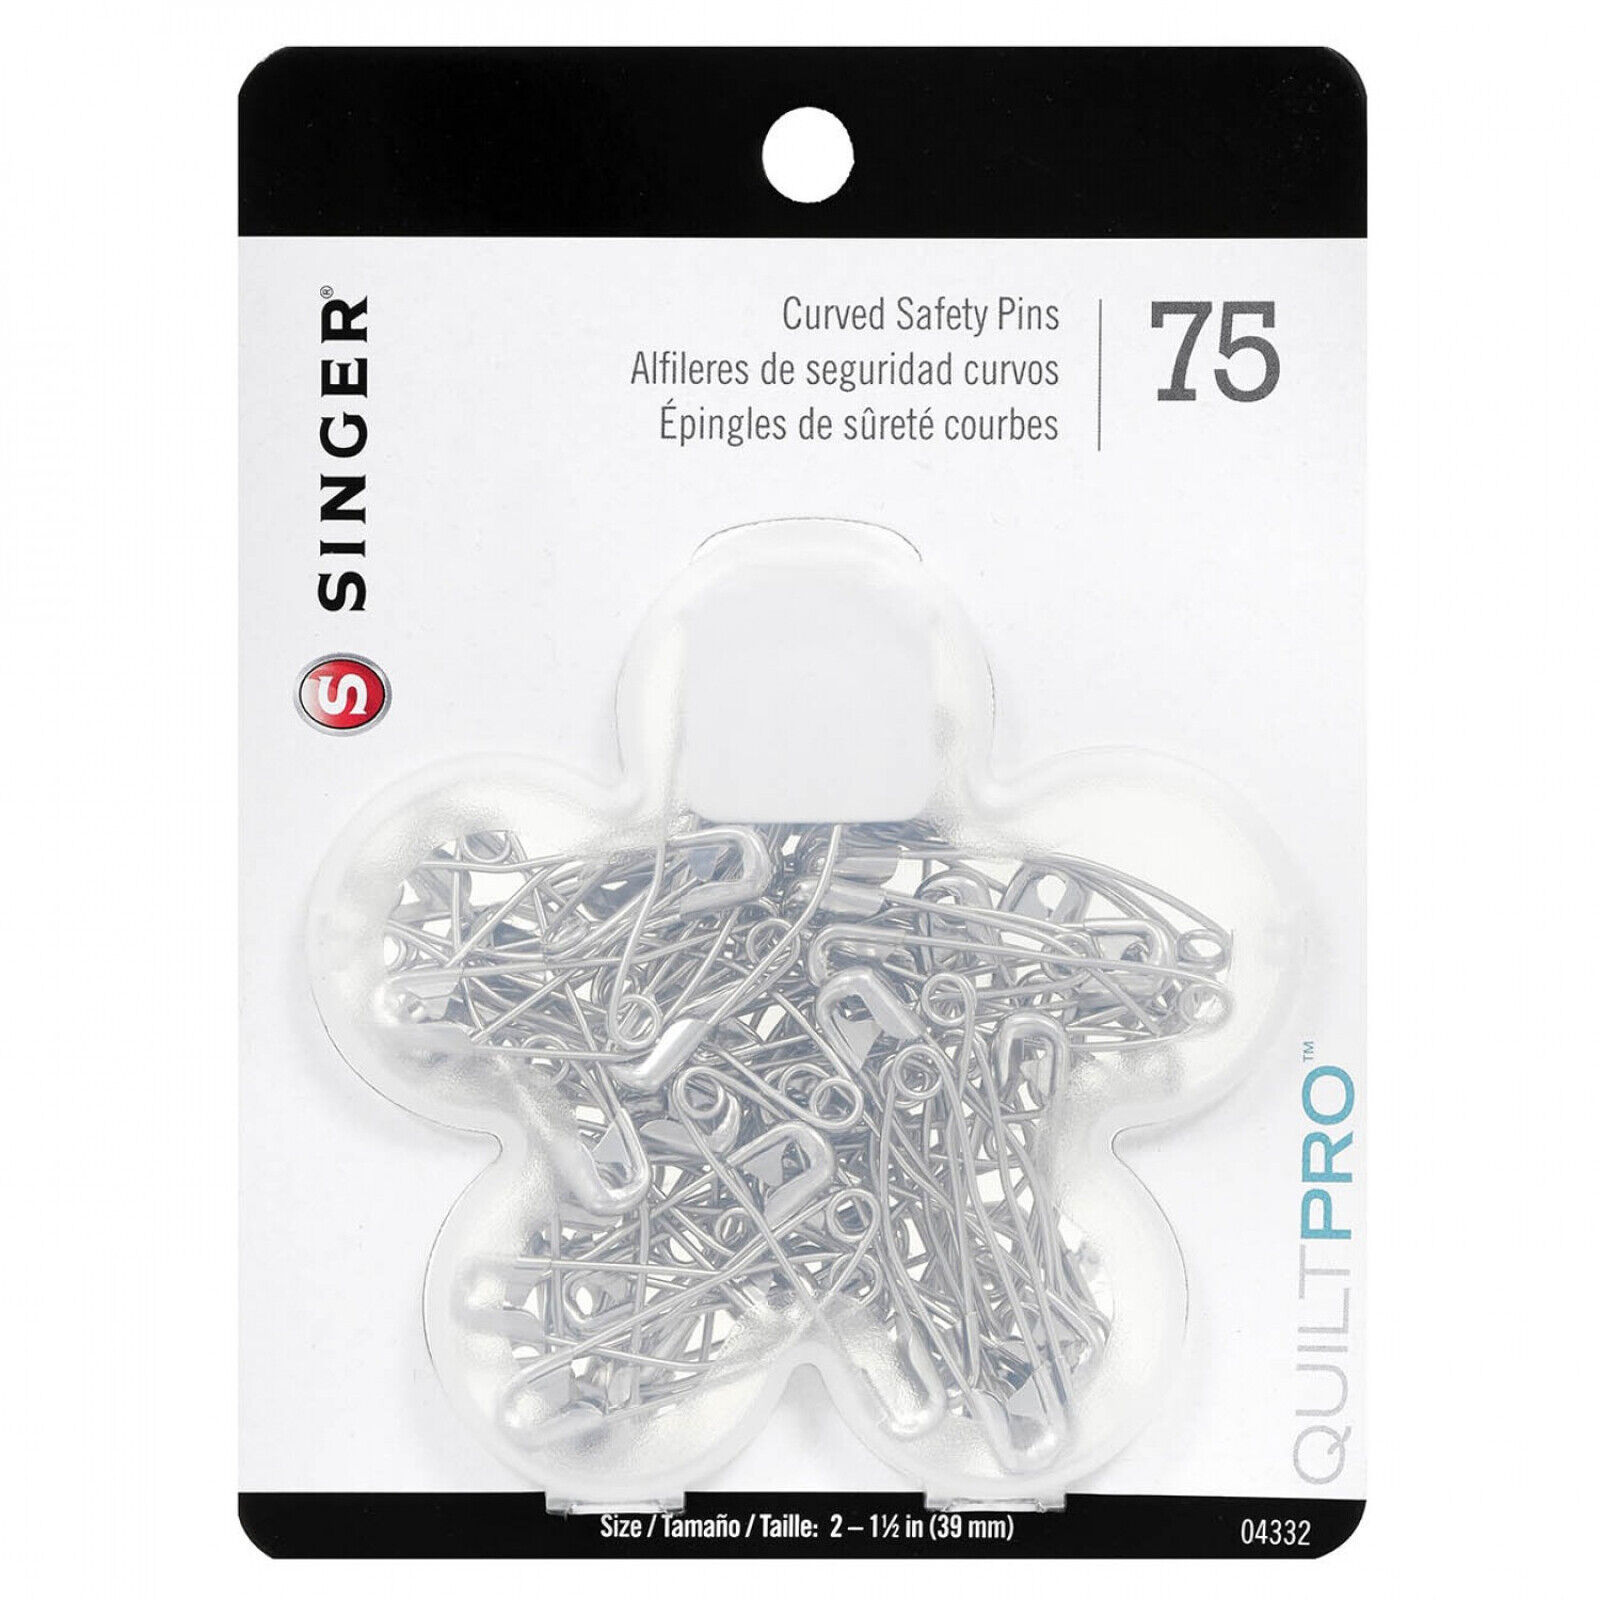 Singer ProSeries Curved Safety Pins in a Flower Case 75ct - $7.95